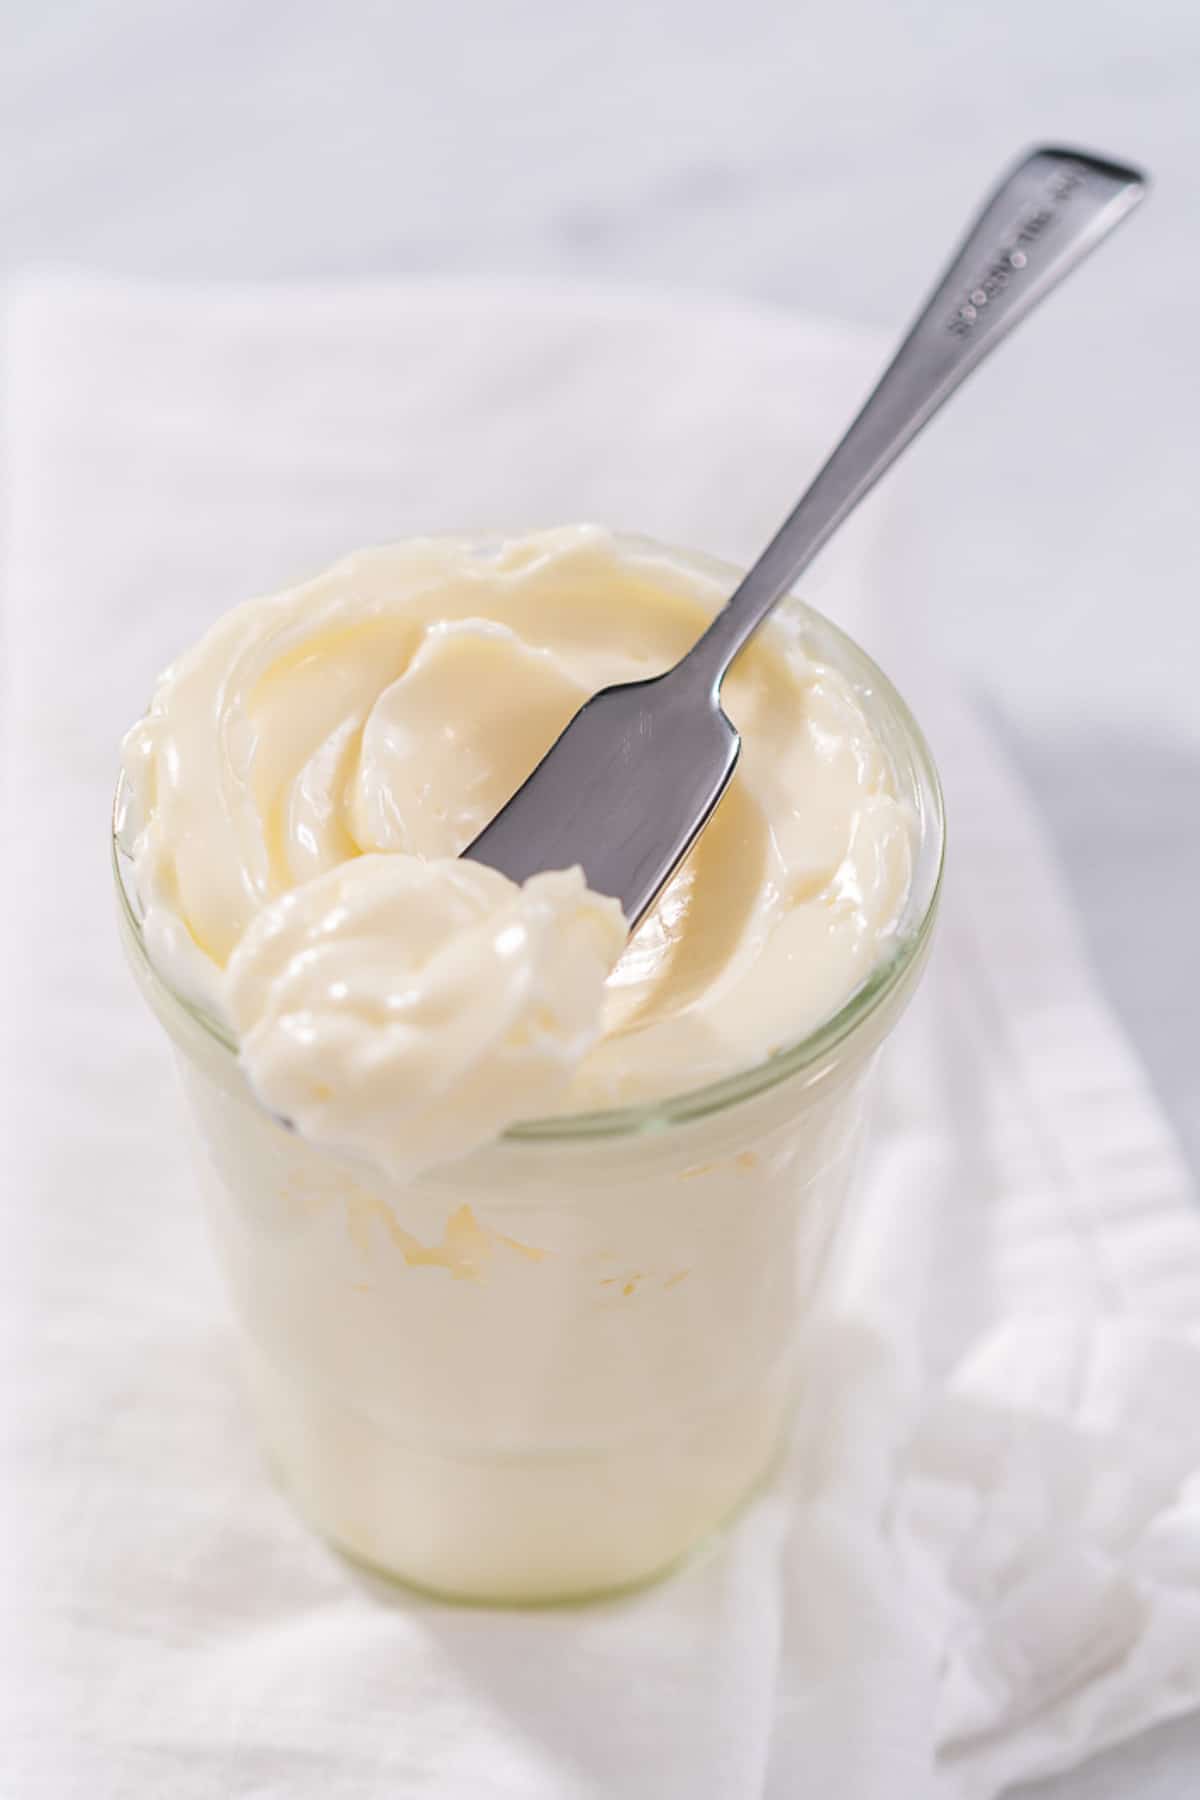 Whole Egg Mayo in a glass jar with metal knife taking a scoop out.